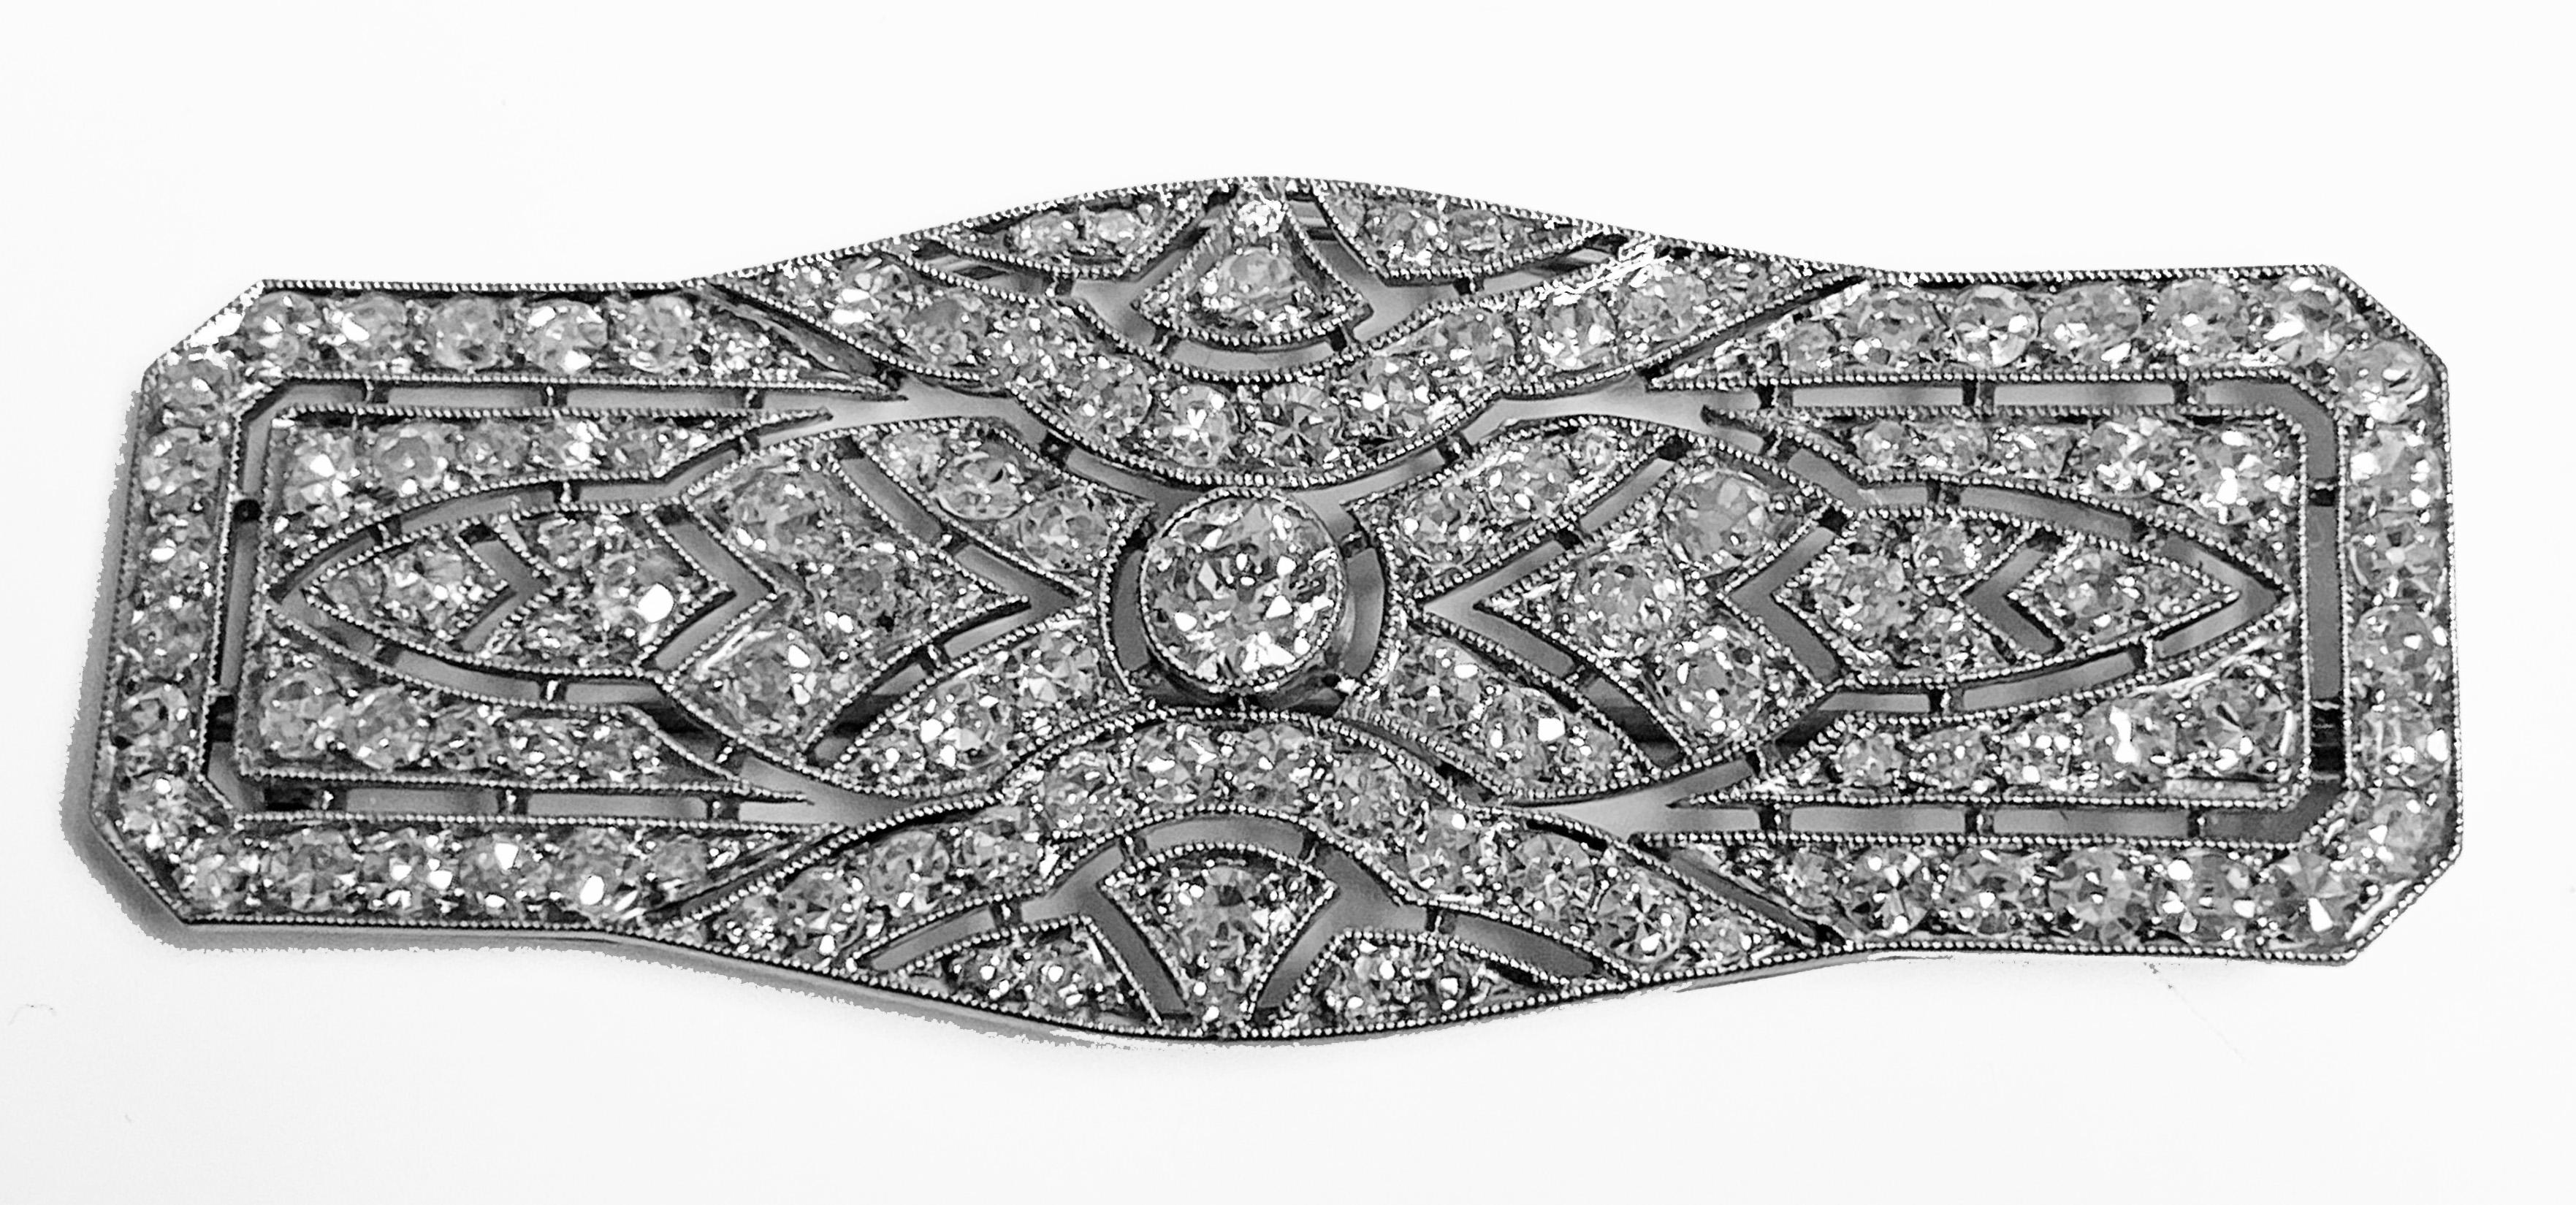 Art Deco French Diamond Platinum plaque Brooch, C.1910. The Brooch of rectangular shape with chamfered corners, milligrain set in the centre with an old european cut diamond approximately 0.40 ct. The surround mount of open pierced milligrain design